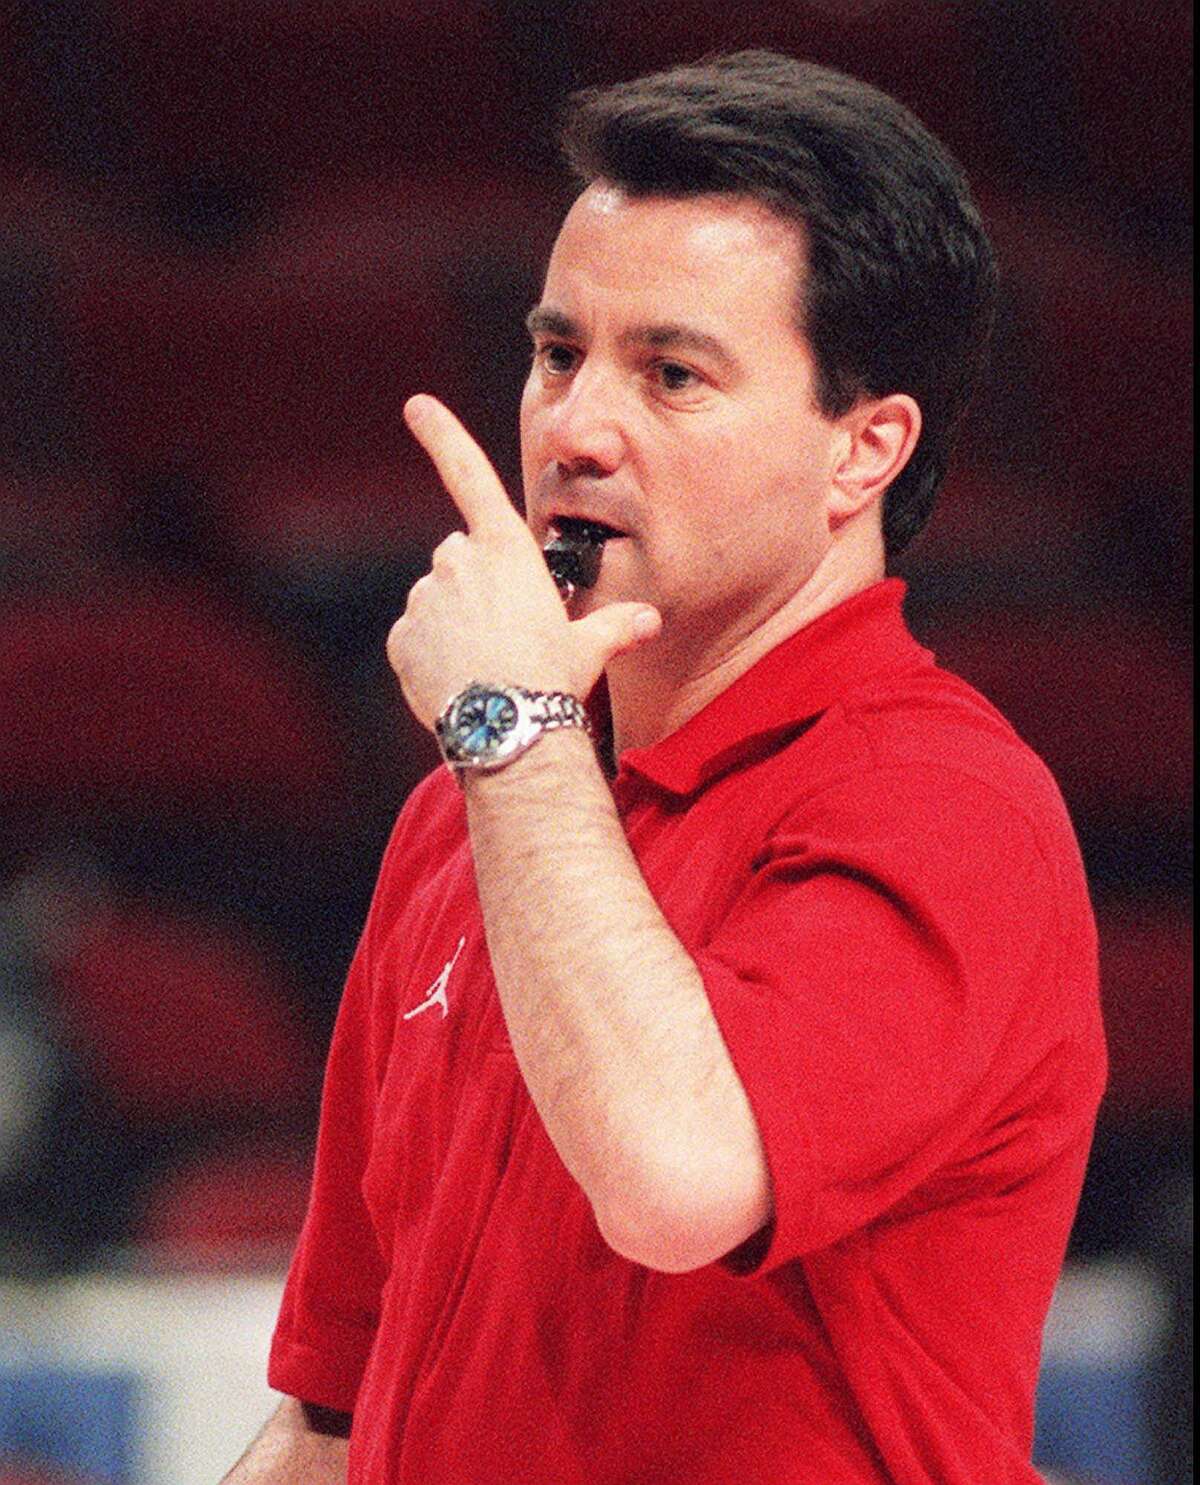 St. John's University head coach Fran Fraschilla blows his whistle during team drills at the United Center Thursday, March 12, 1998, in Chicago. St. John's is preparing to face Detroit in the first round of the NCAA Midwest Regionals in Chicago Friday, March 13, 1998. (AP Photo/Fred Jewell)